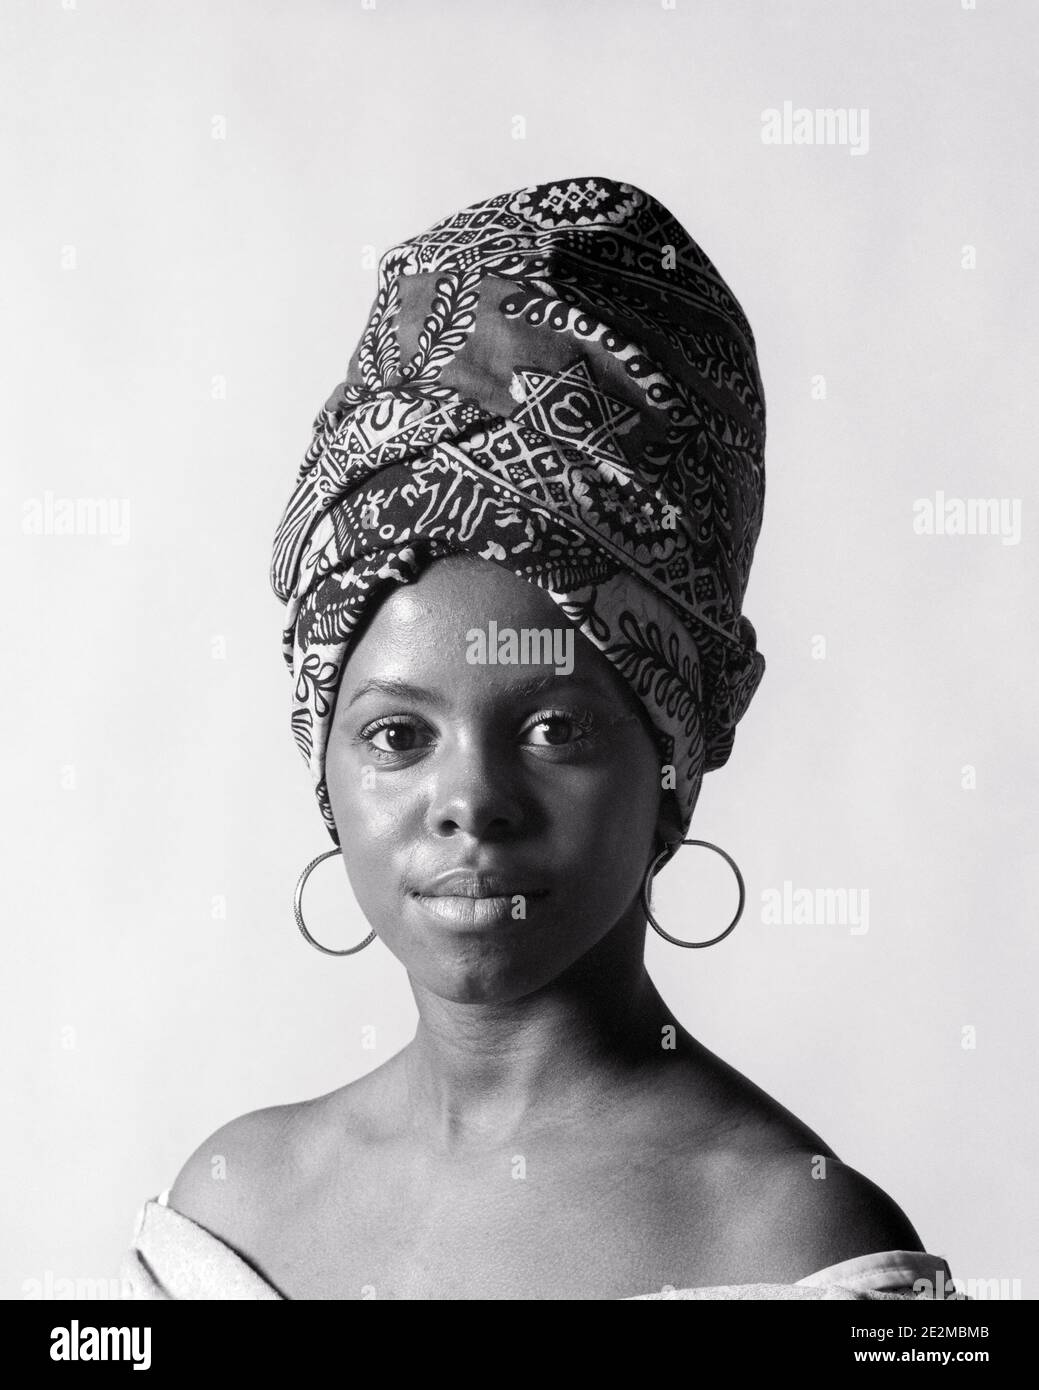 1970s PORTRAIT AFRICAN AMERICAN YOUNG WOMAN LOOKING AT CAMERA WEARING A TIGON A PRINT FABRIC HEAD-WRAP AND HOOP EARRINGS - g8000 HAR001 HARS SPANISH JOY LIFESTYLE CELEBRATION FEMALES RURAL HEALTHINESS COPY SPACE LADIES PERSONS CLOTH TRADITIONAL EARRINGS CARING SPIRITUALITY CONFIDENCE B&W EYE CONTACT MATERIAL HAPPINESS WELLNESS HEAD AND SHOULDERS STRENGTH STYLES AFRICAN-AMERICANS COURAGE AFRICAN-AMERICAN CHOICE KNOWLEDGE BLACK ETHNICITY LOUISIANA PRIDE CONCEPTUAL STYLISH TEENAGED TURBAN CREOLE WIDE-EYED CREATIVITY FASHIONS OMAN PERIOD YOUNG ADULT WOMAN BLACK AND WHITE DESCENT HAR001 Stock Photo